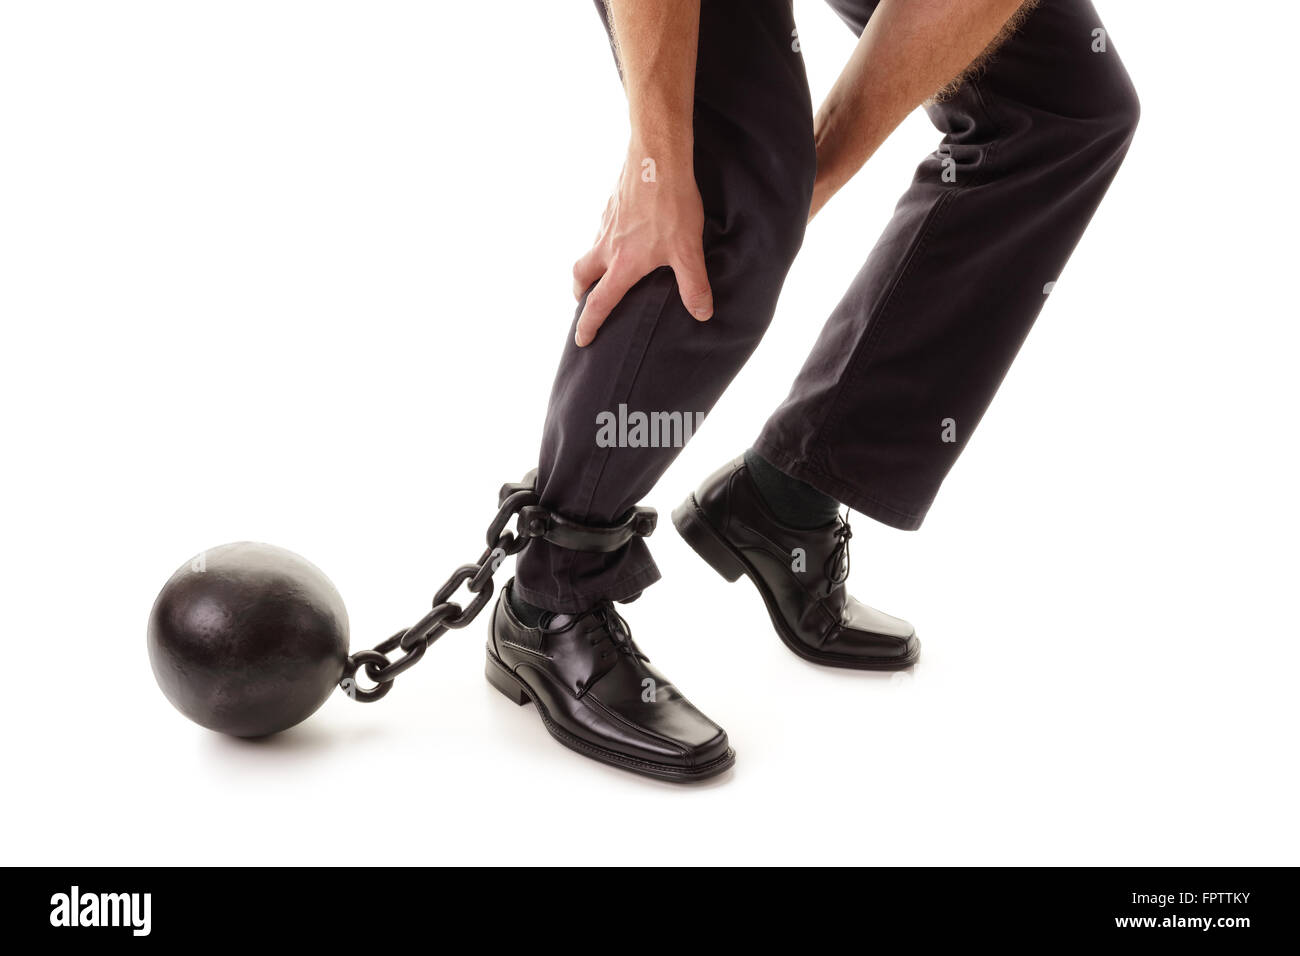 Ball and chain restraining a businessman as he tries to walk concept for business burden, willpower and determination Stock Photo